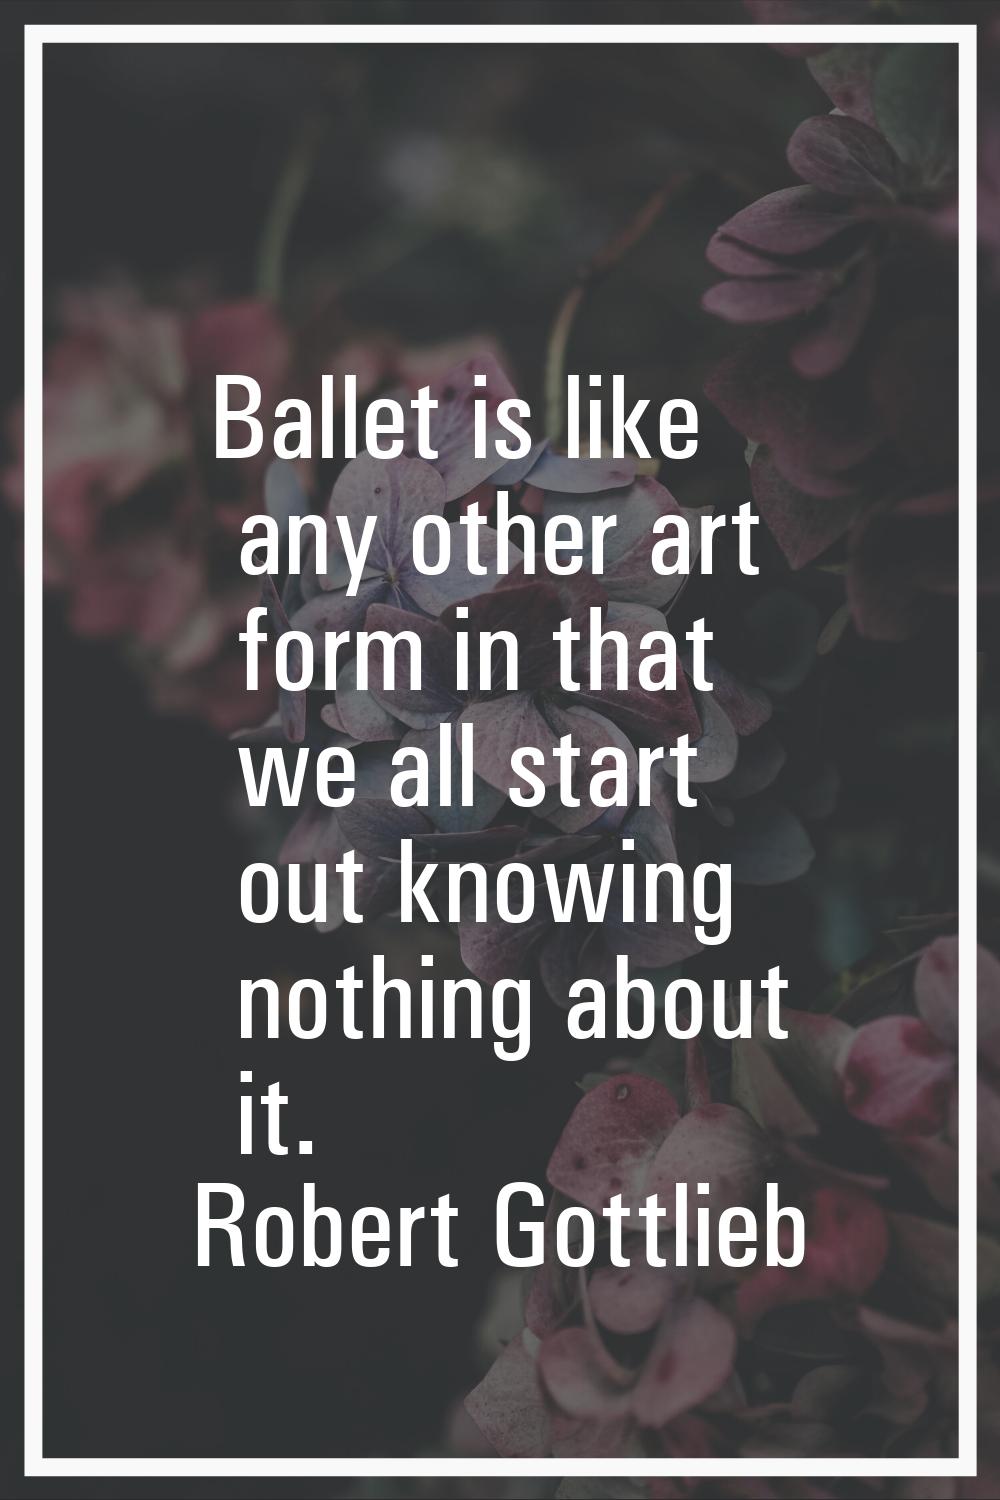 Ballet is like any other art form in that we all start out knowing nothing about it.